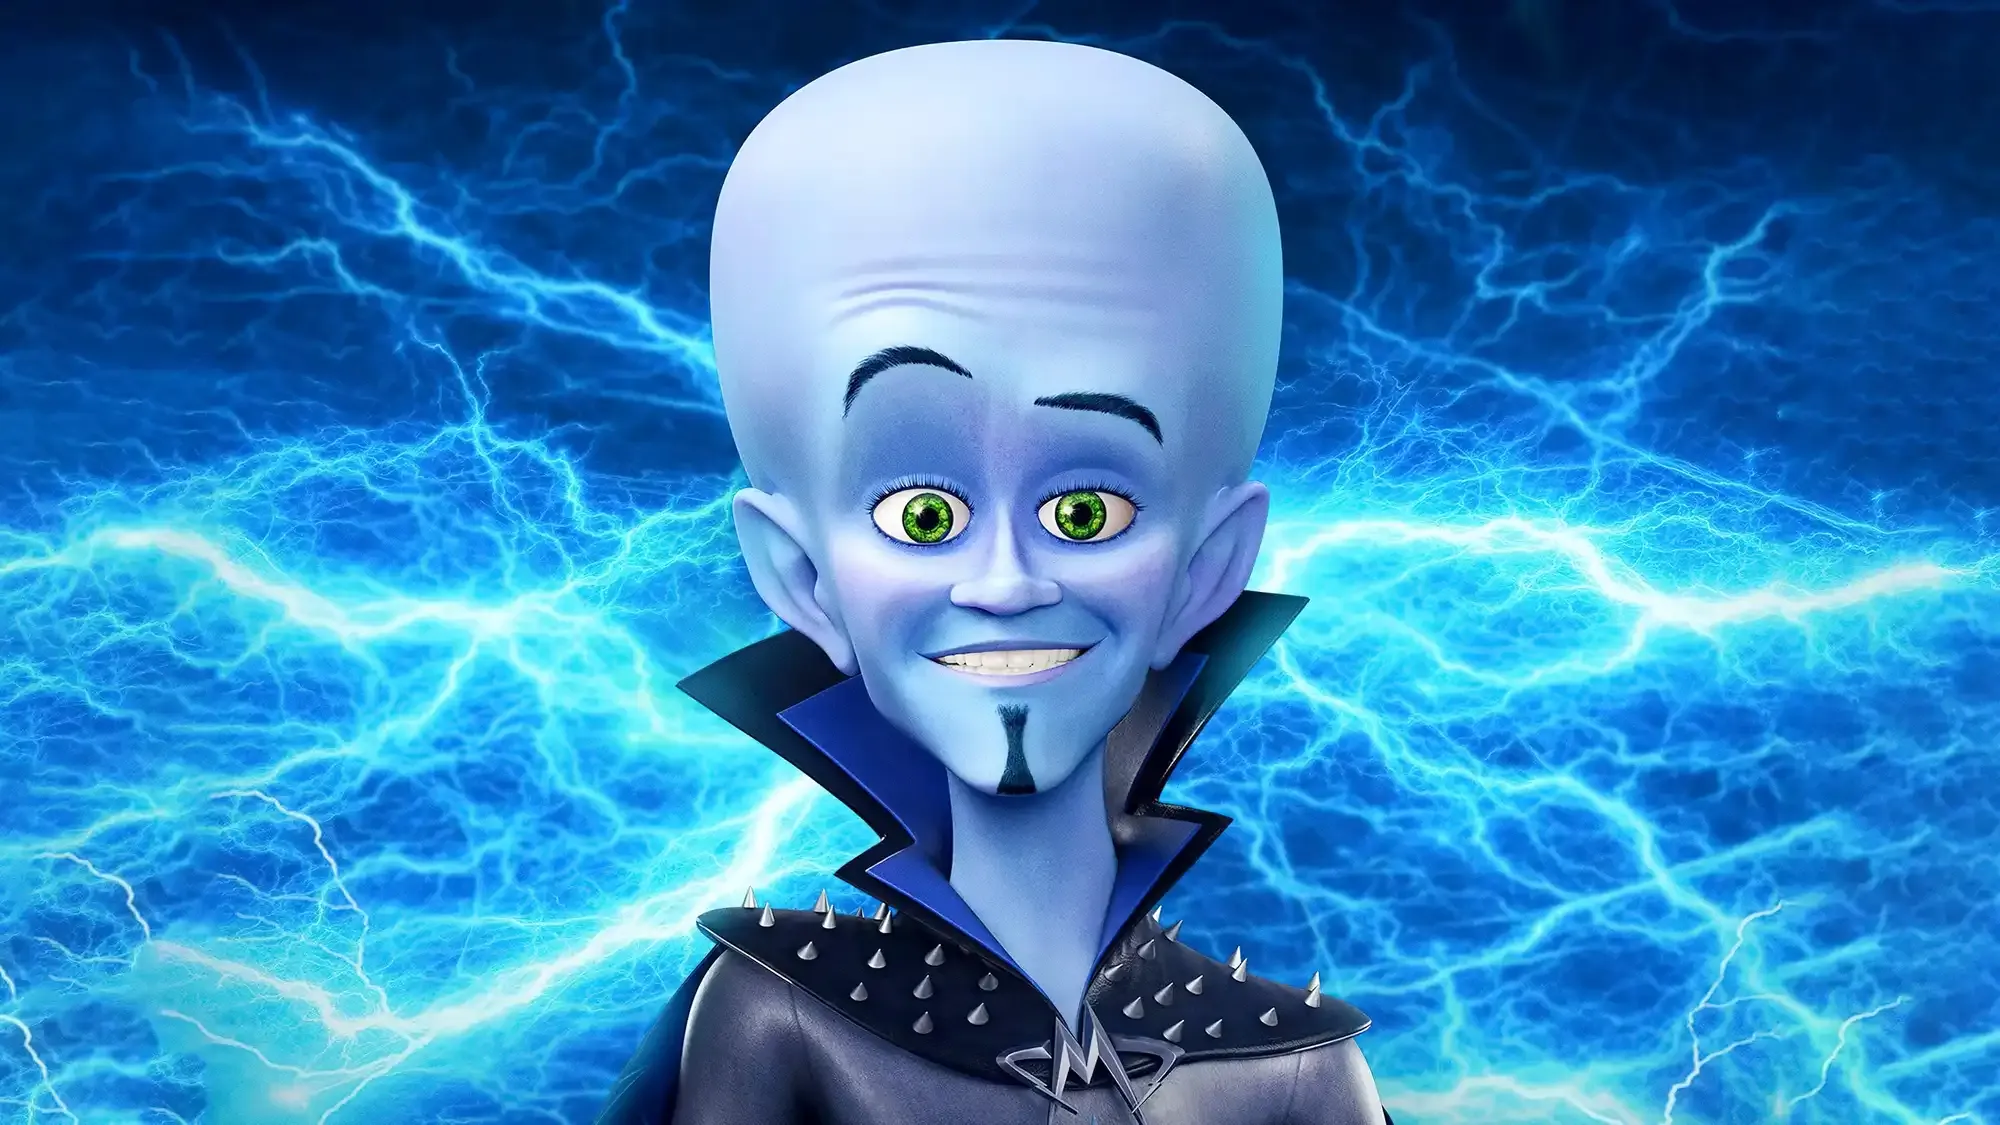 Megamind vs. the Doom Syndicate movie review